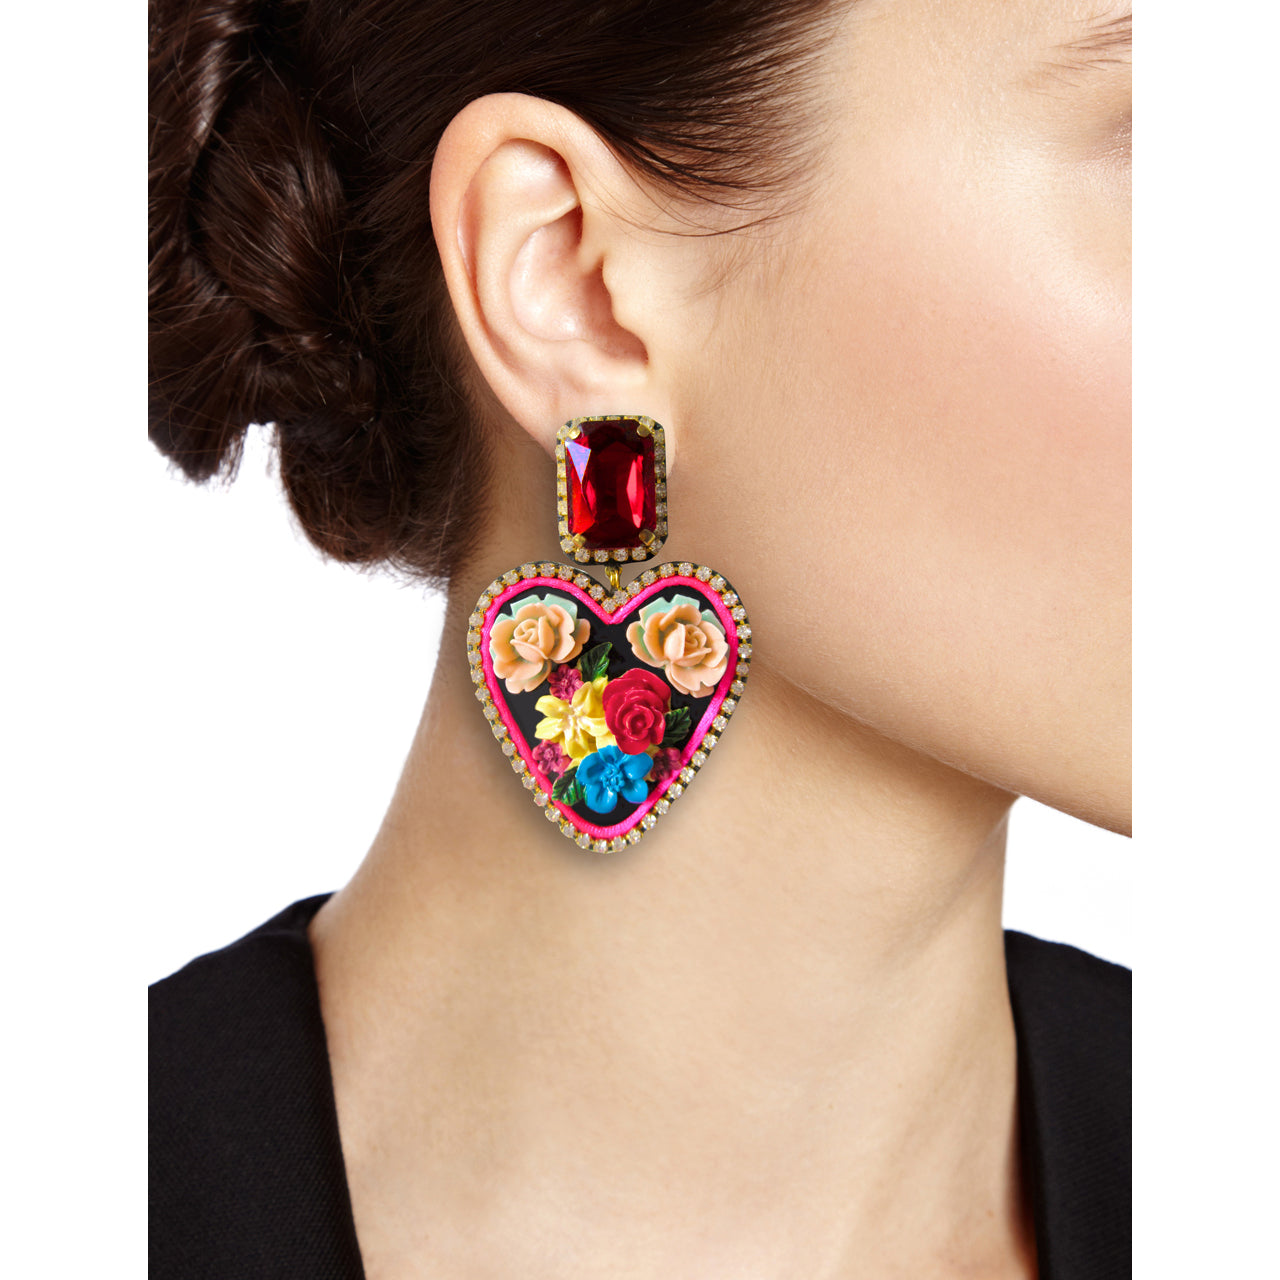 Mouchkine Jewelry floral heart glamour statement earrings. 